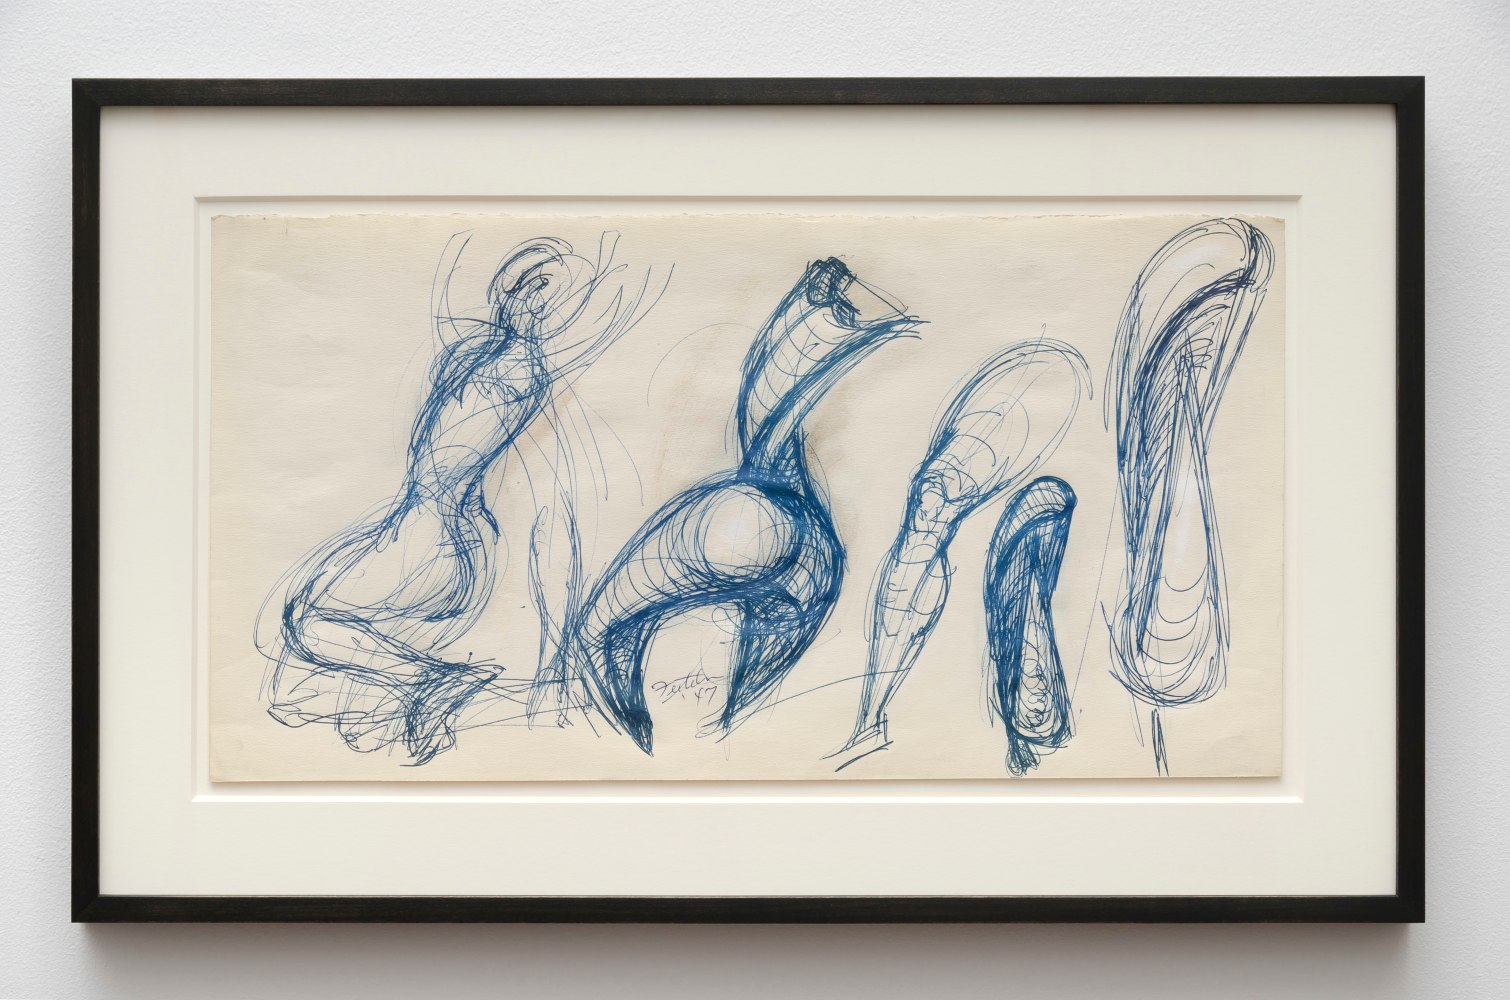 Lorser Feitelson (1898-1978) Untitled, 1947 ball point on paper 10 1/2 x 19 7/8 inches; 26.7 x 50.5 centimeters ​LSFA# 00363